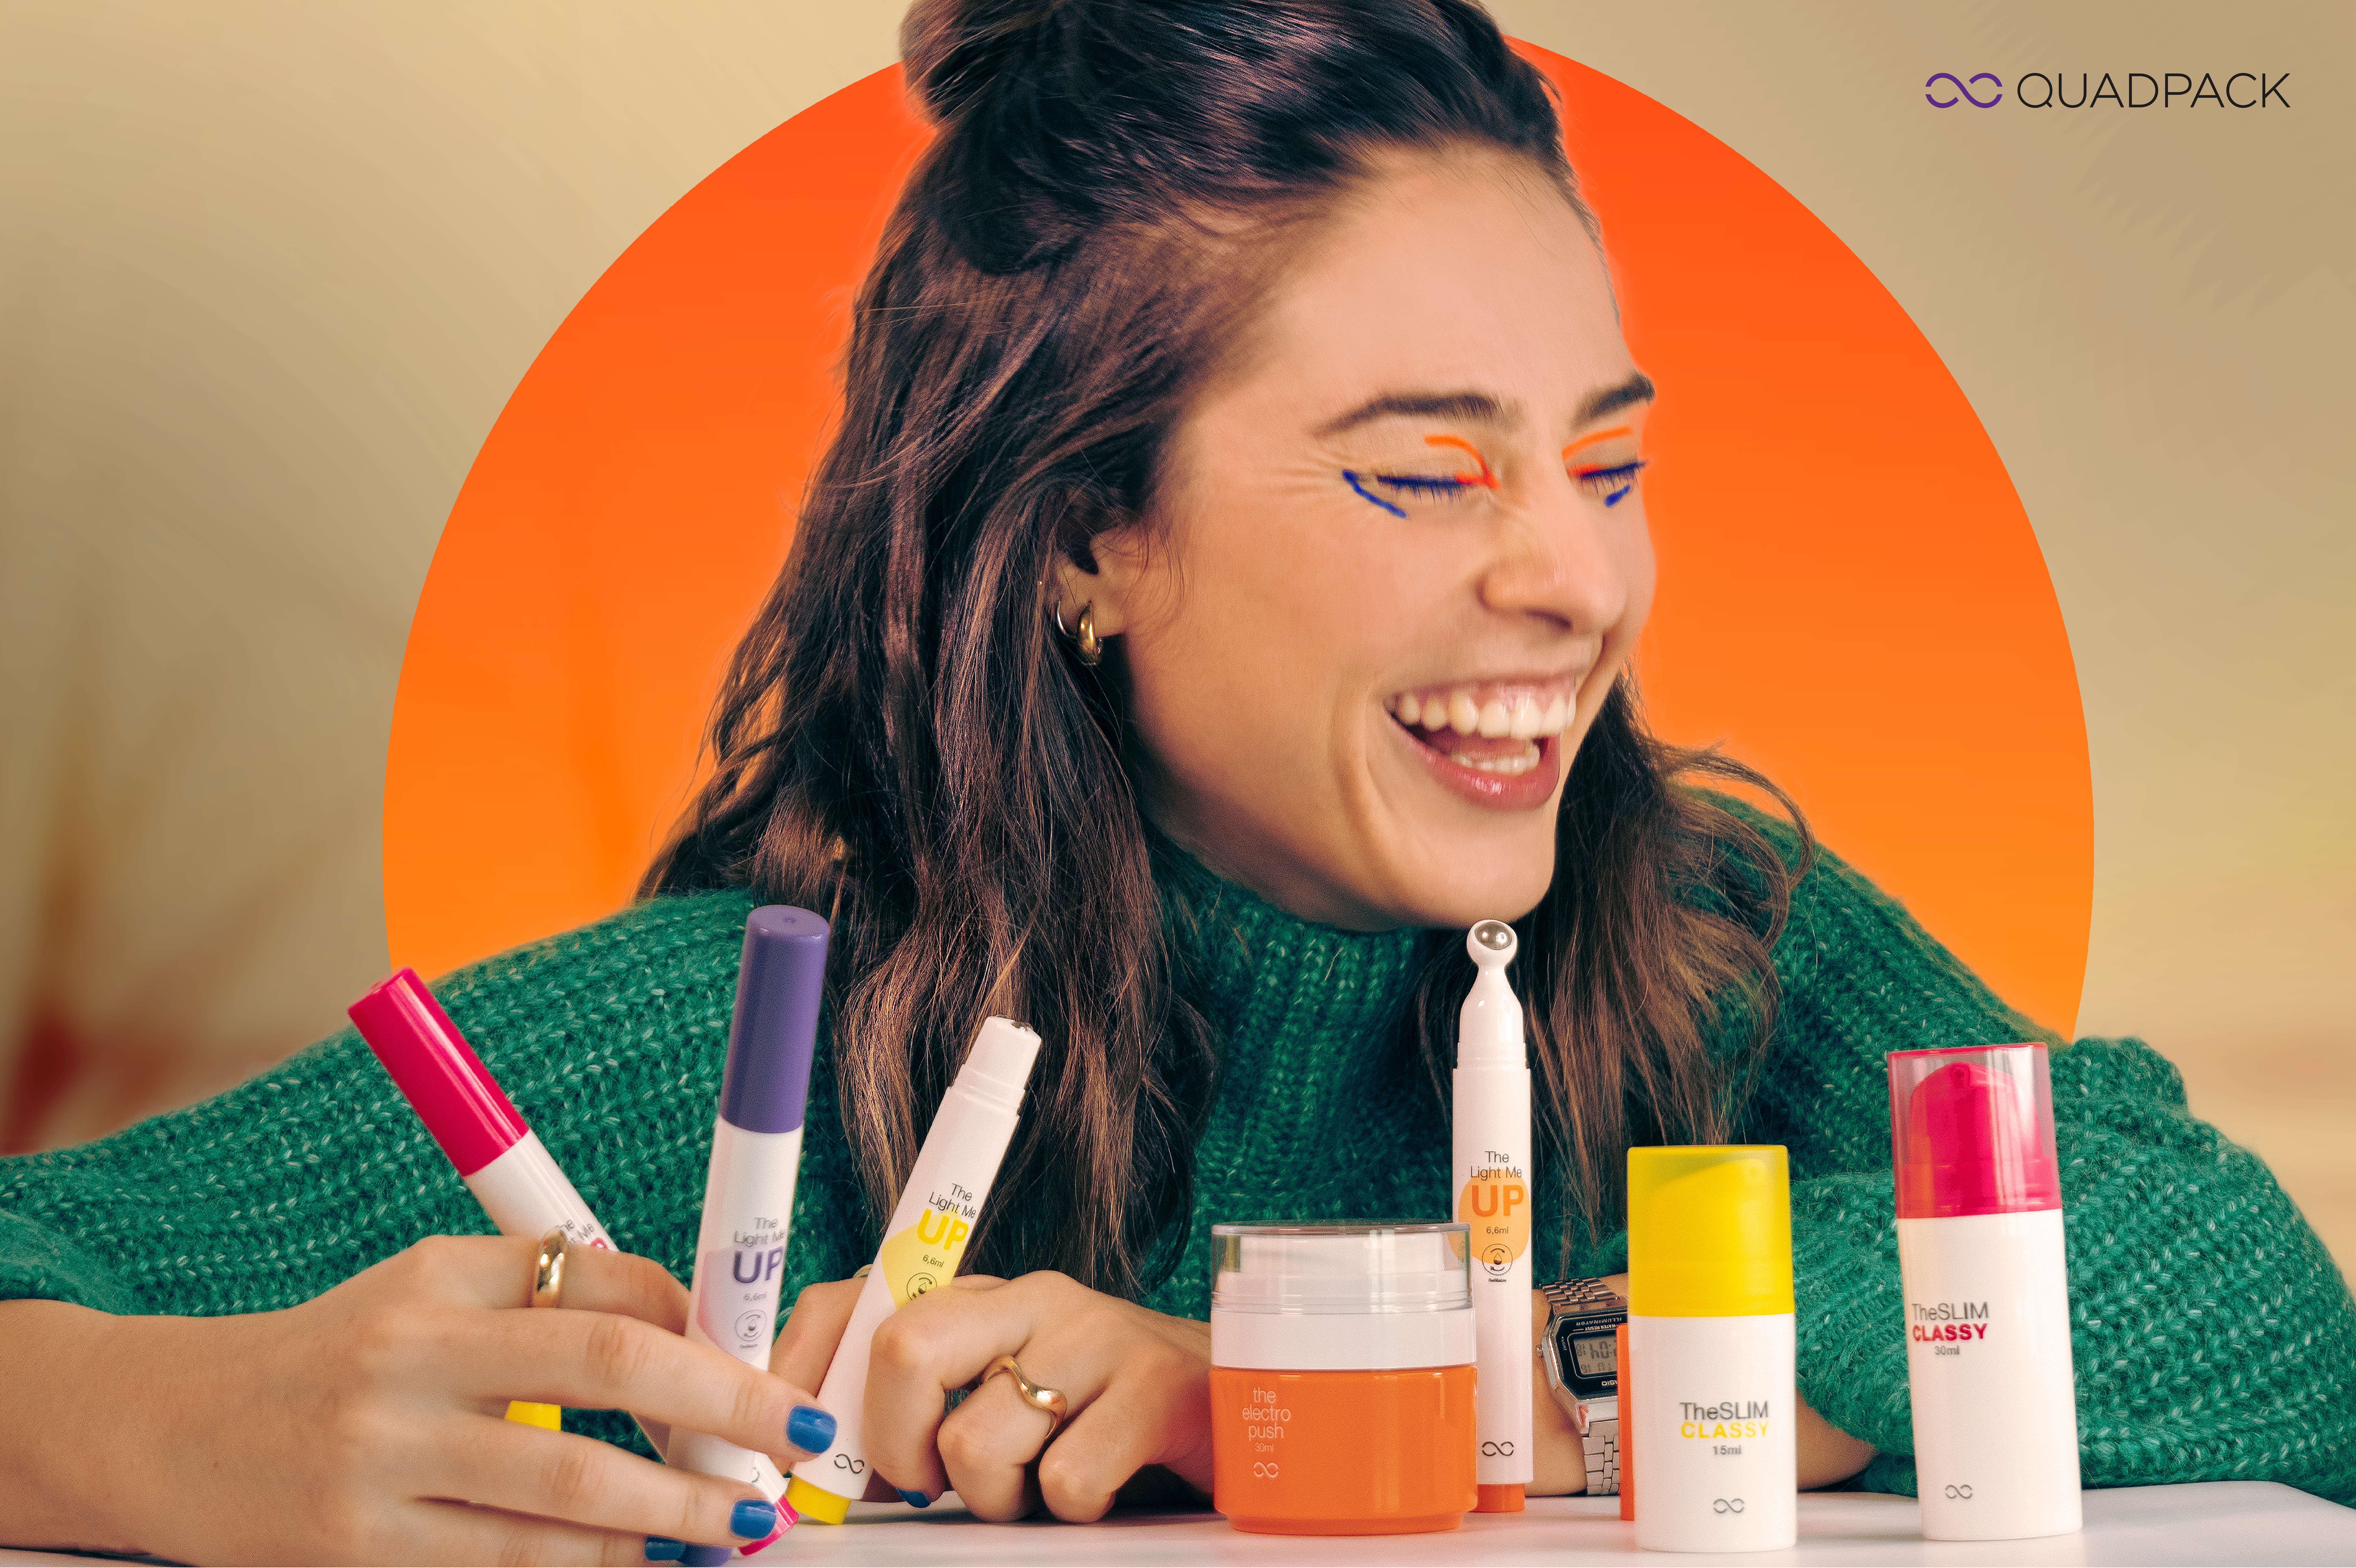 Woman laughing holding colorful cosmetic packaging samples